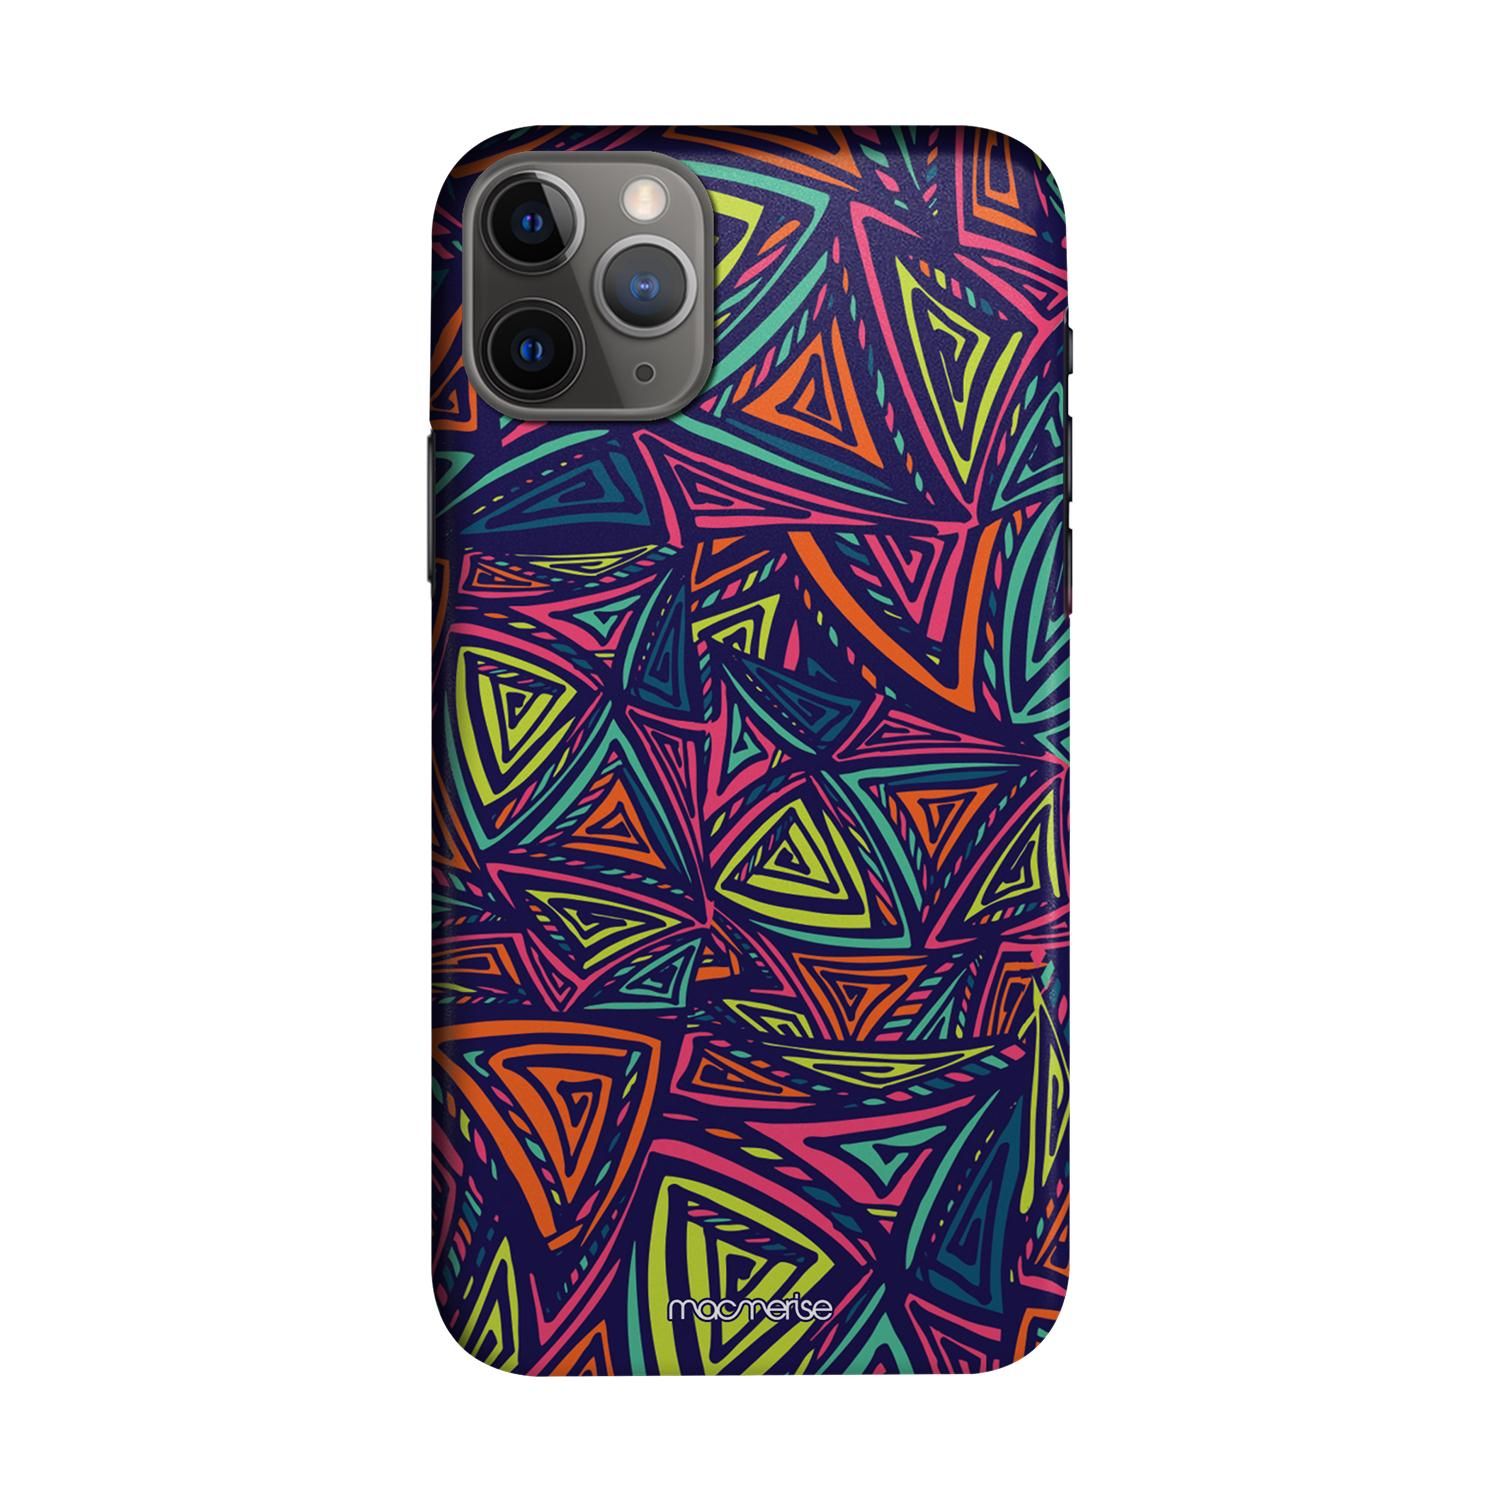 Buy Neon Angles - Sleek Phone Case for iPhone 11 Pro Max Online